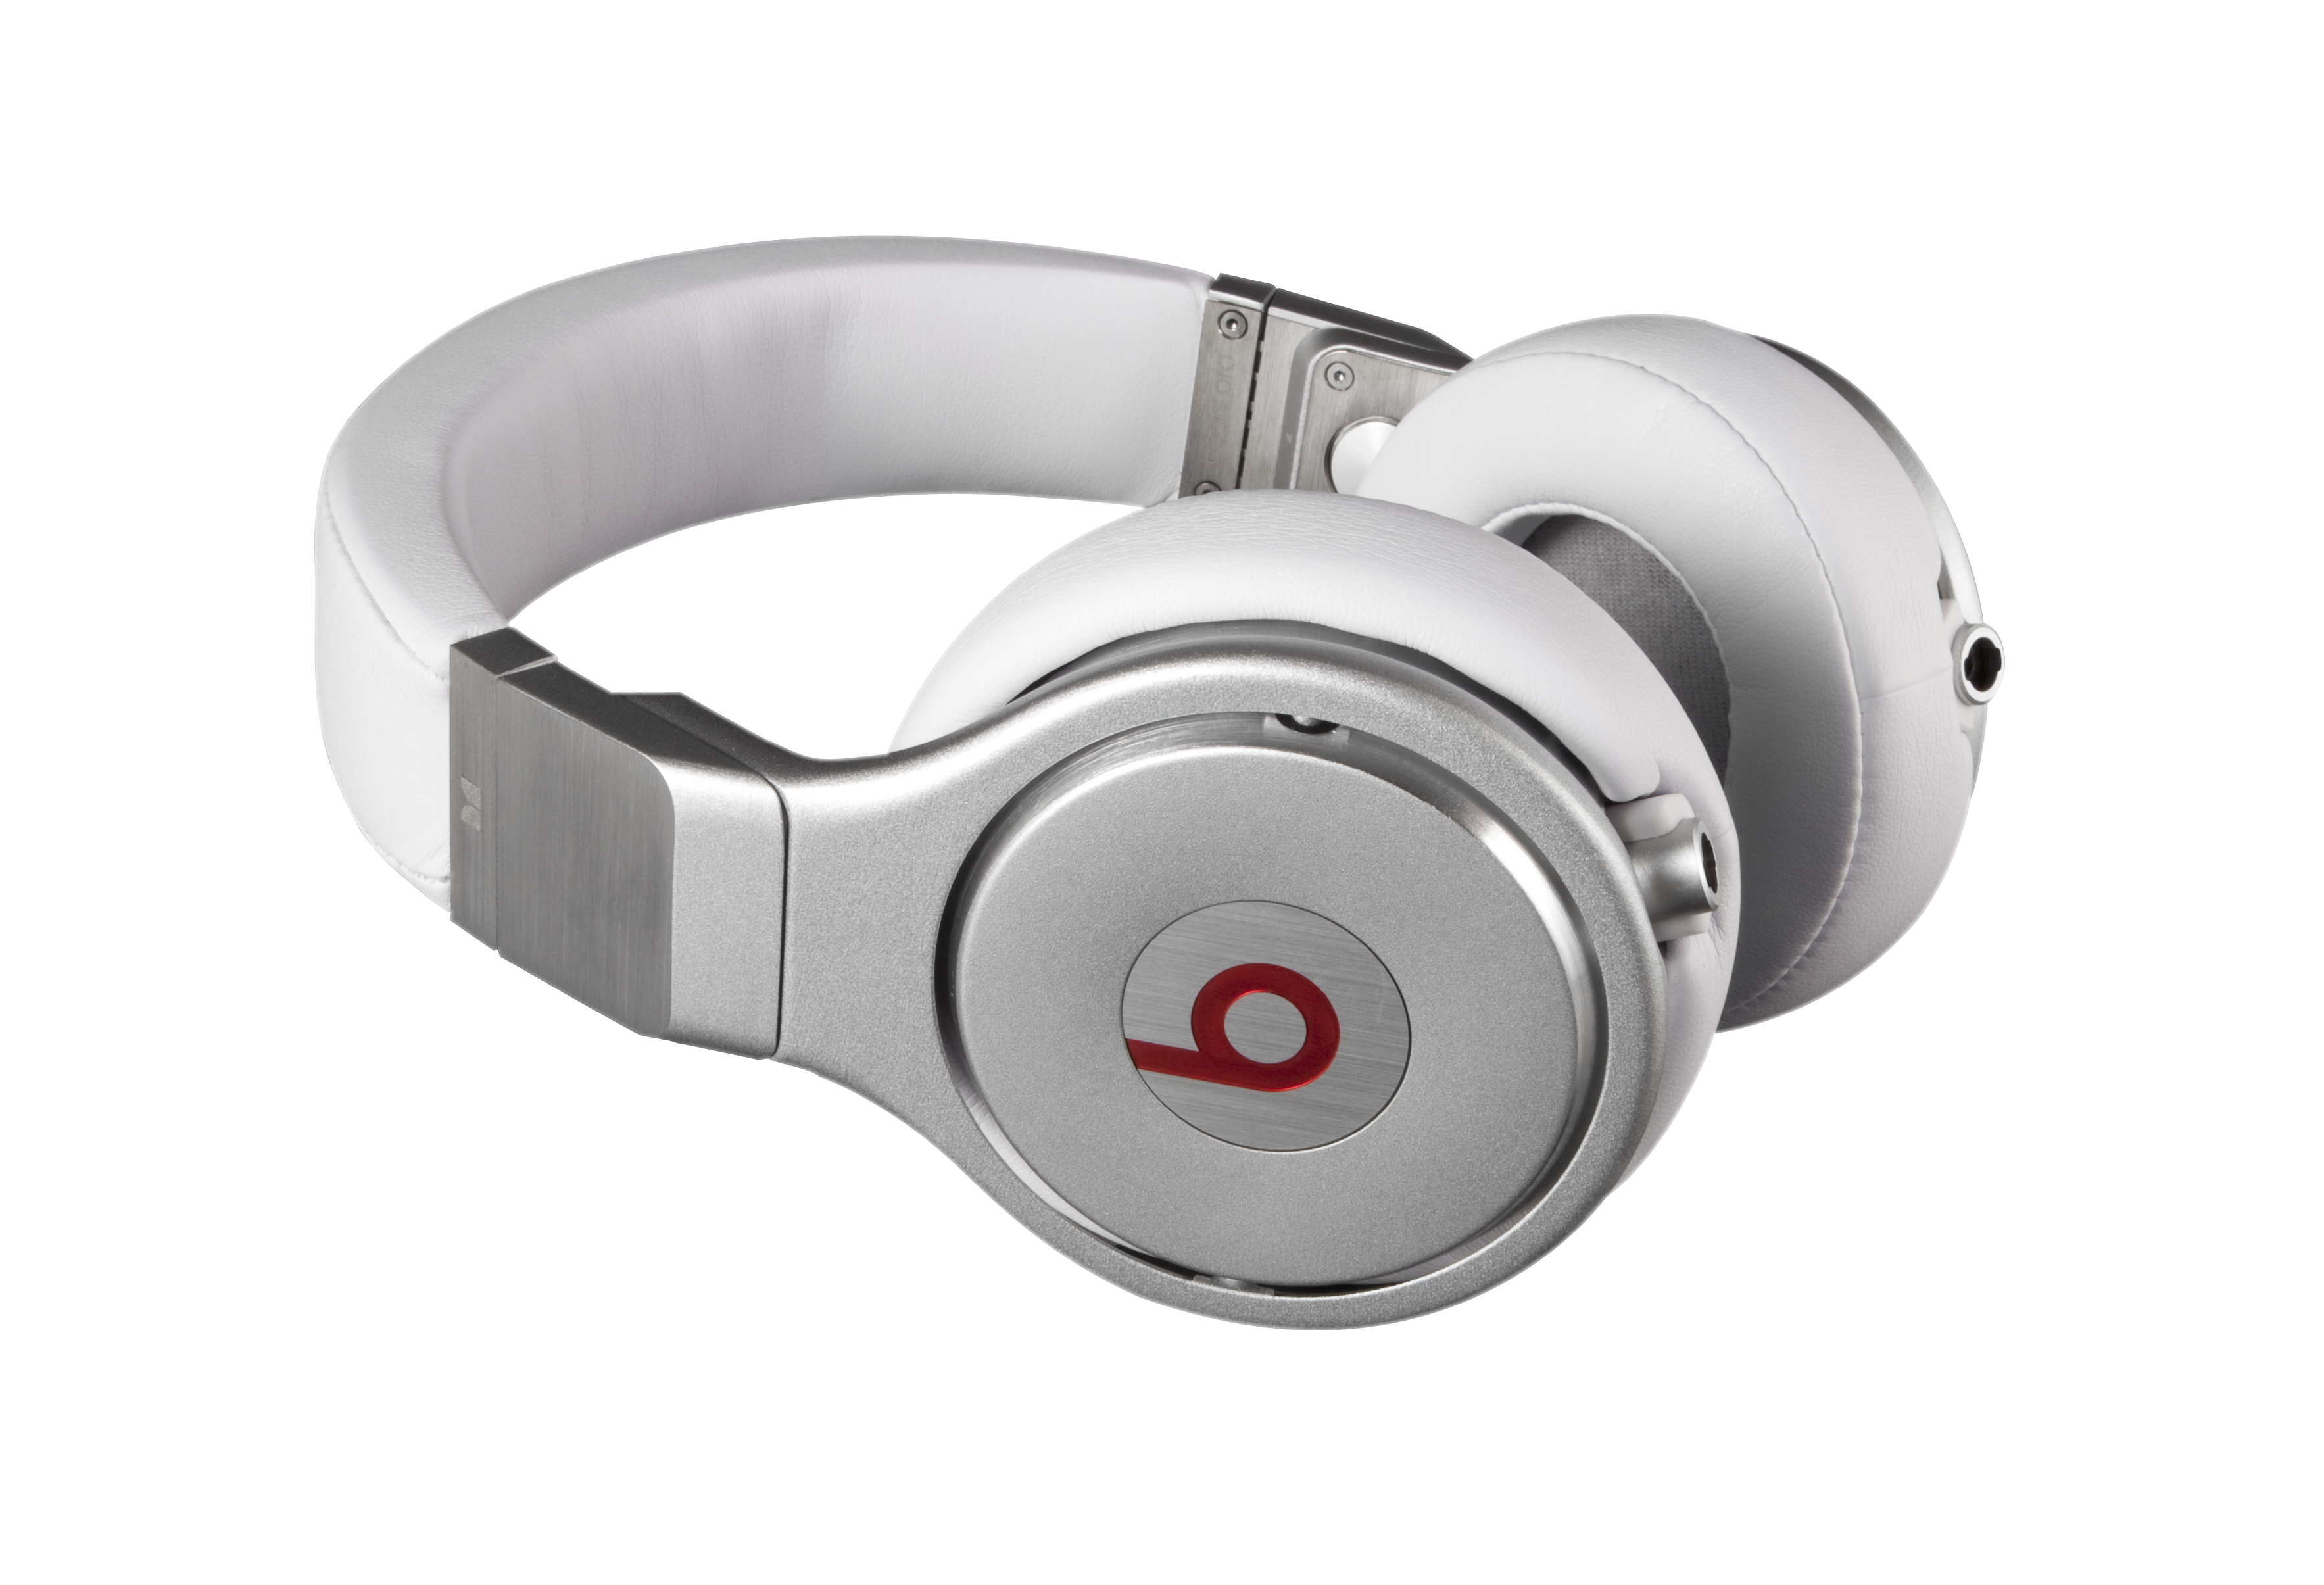 MHBTS POEWH 129480 GLAM1 - Beats Pro by Beats Dr. Dre